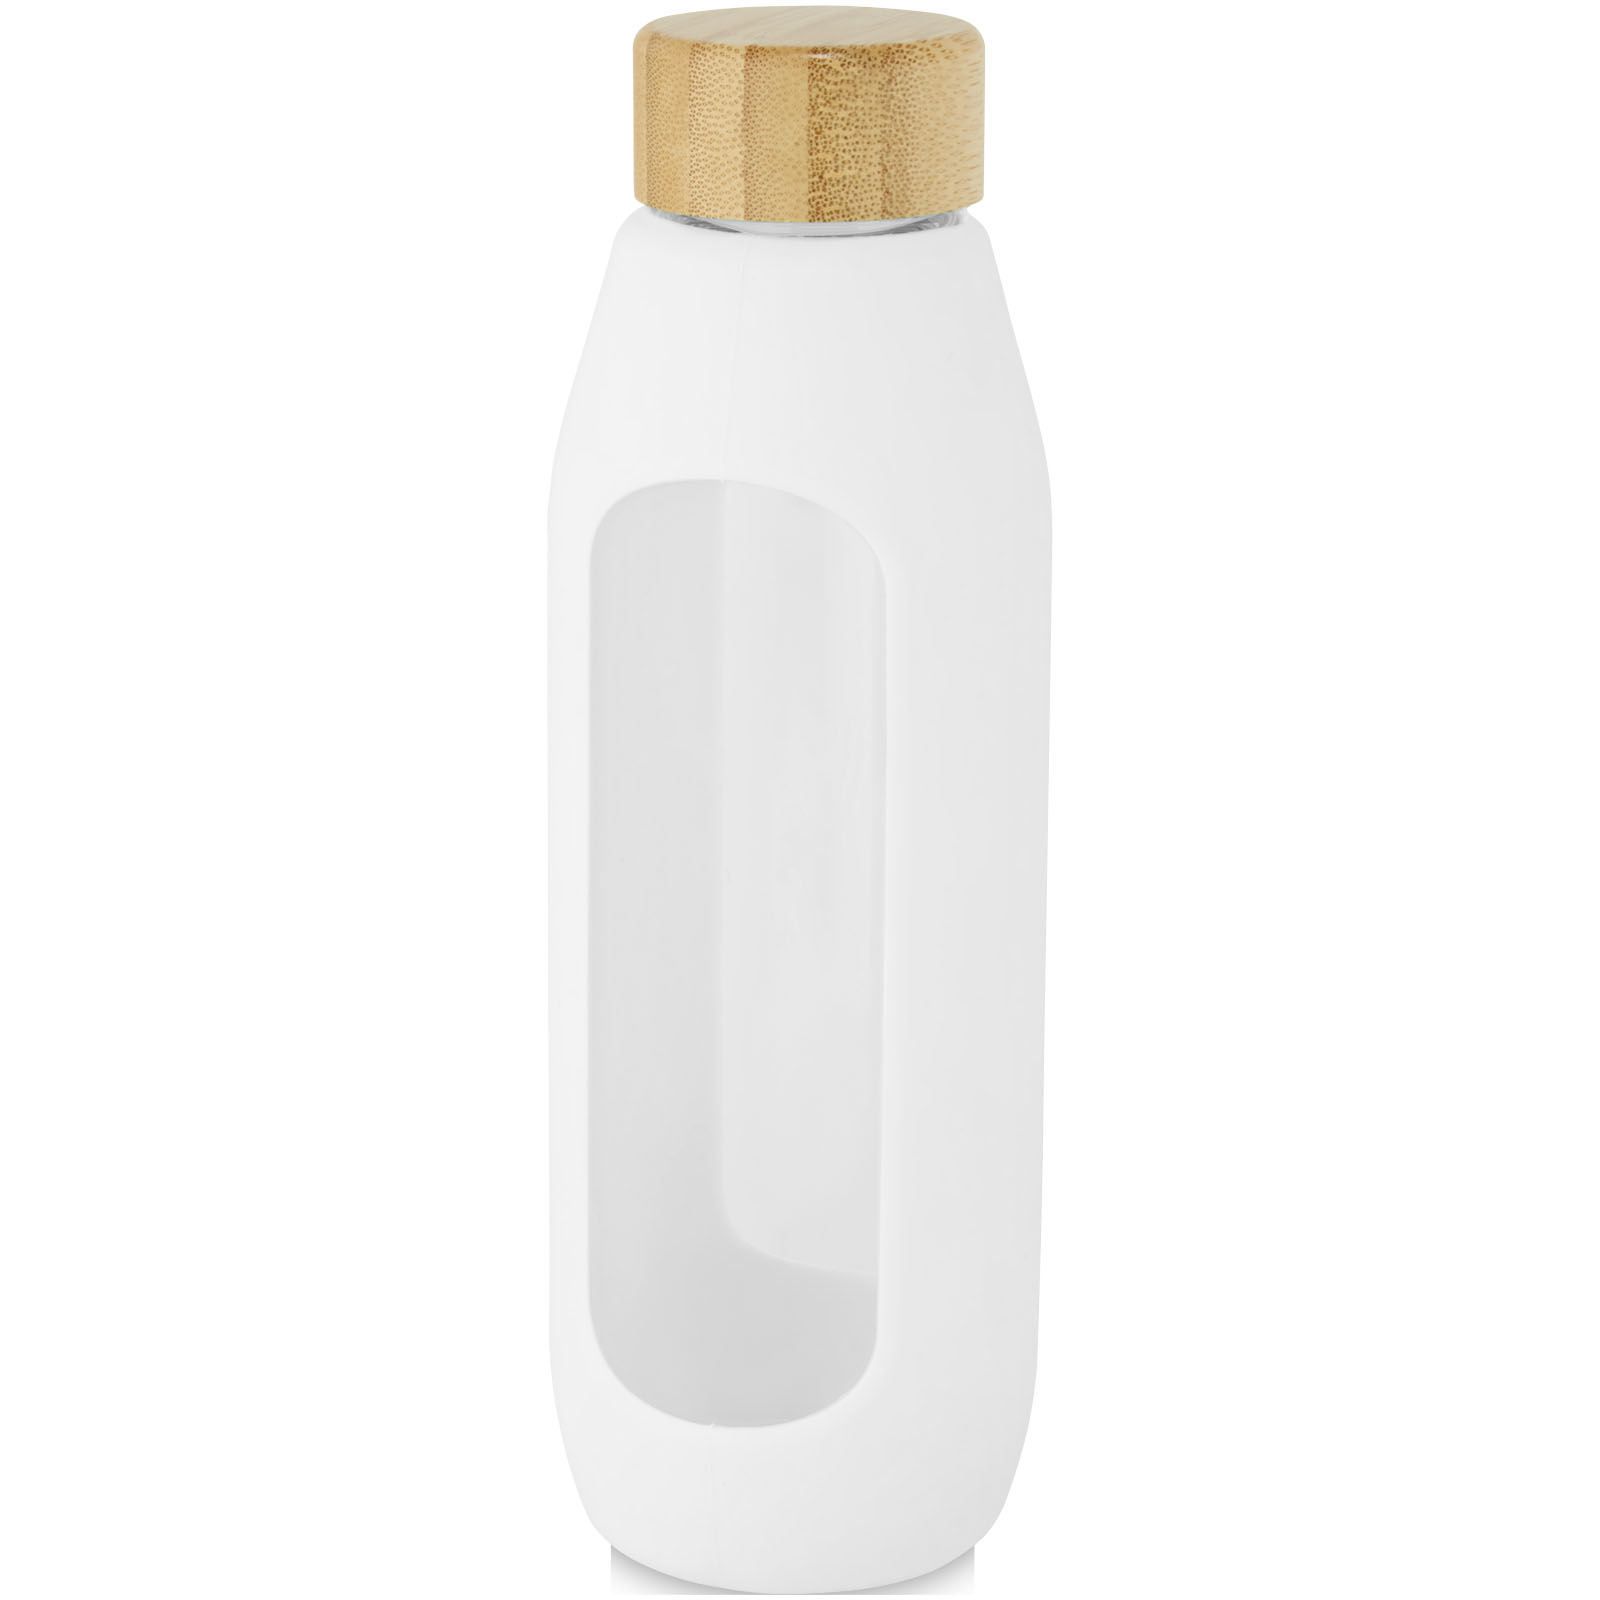 Advertising Water bottles - Tidan 600 ml borosilicate glass bottle with silicone grip - 4